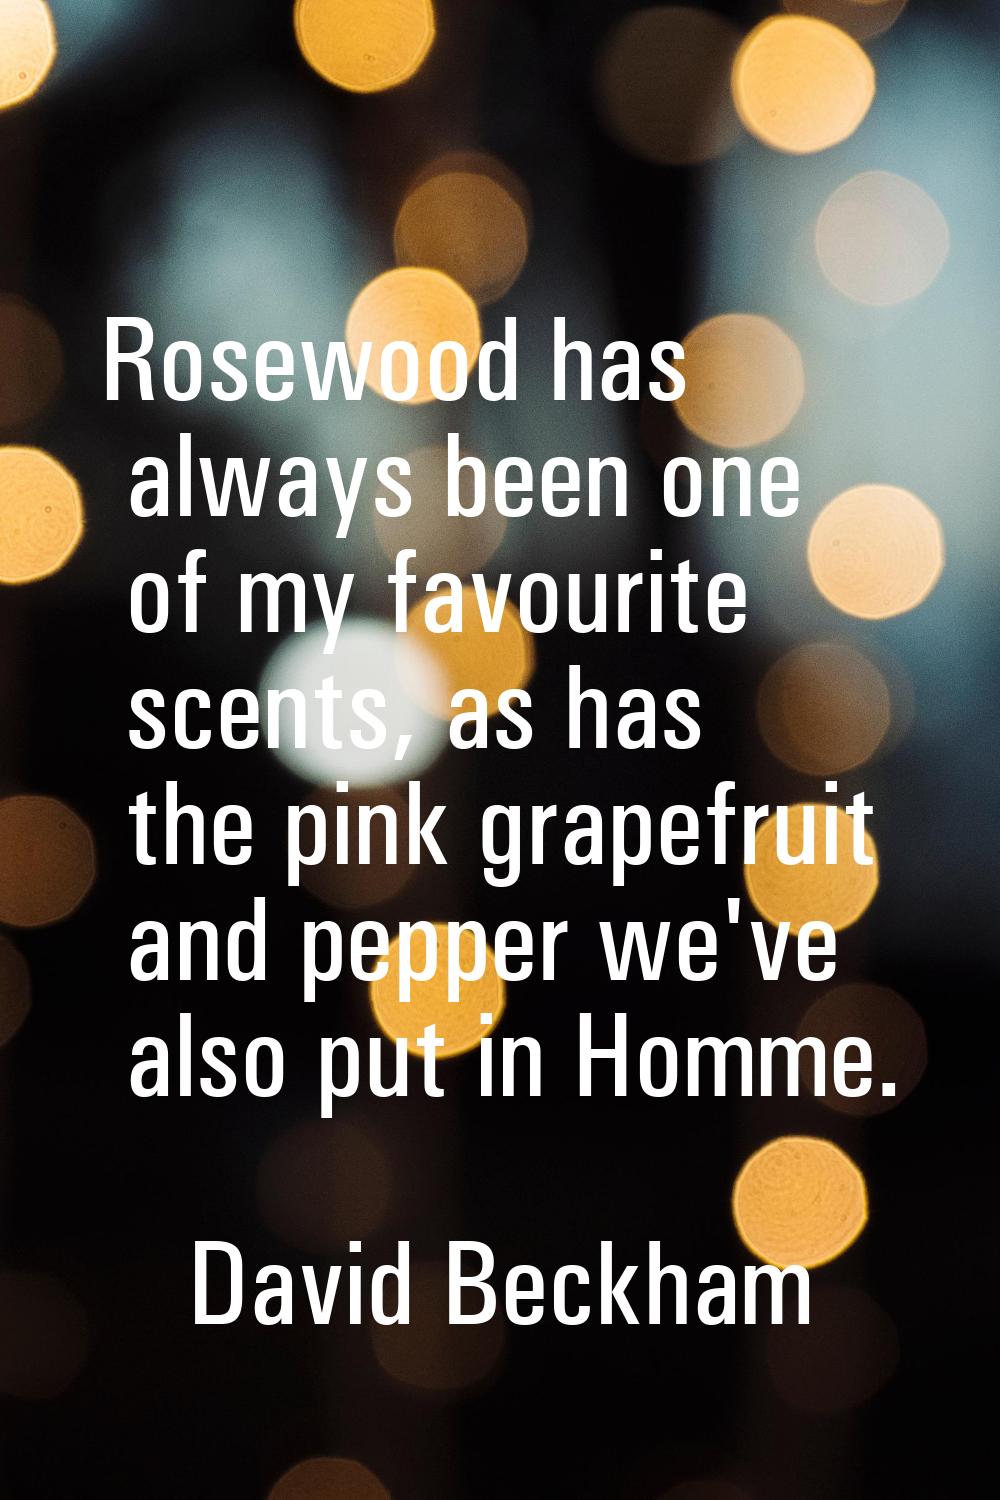 Rosewood has always been one of my favourite scents, as has the pink grapefruit and pepper we've al